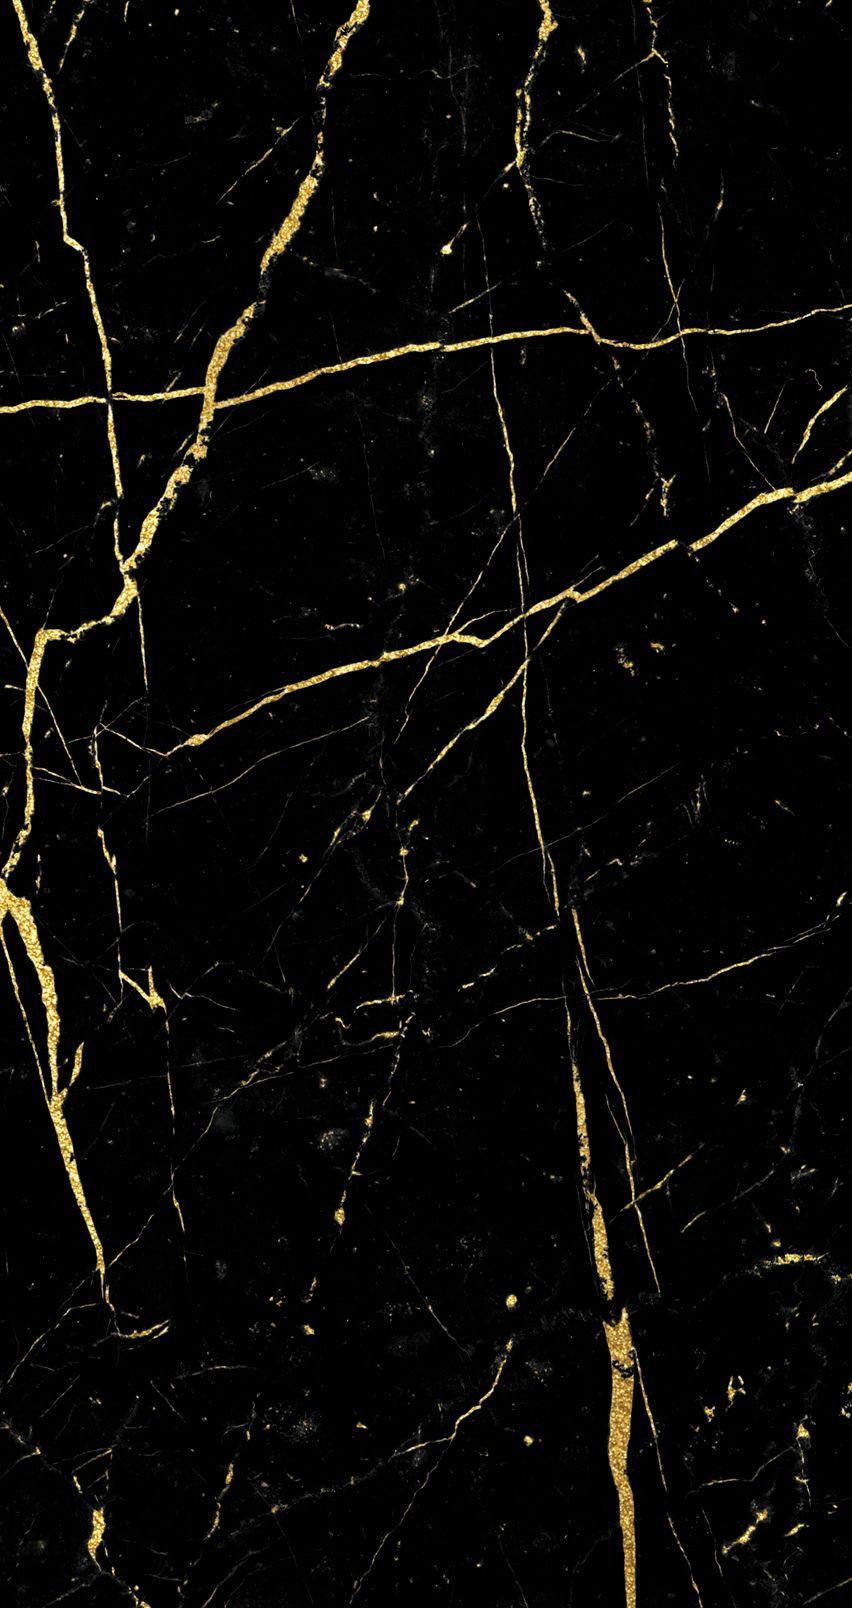 Marble iPhone Wallpaper